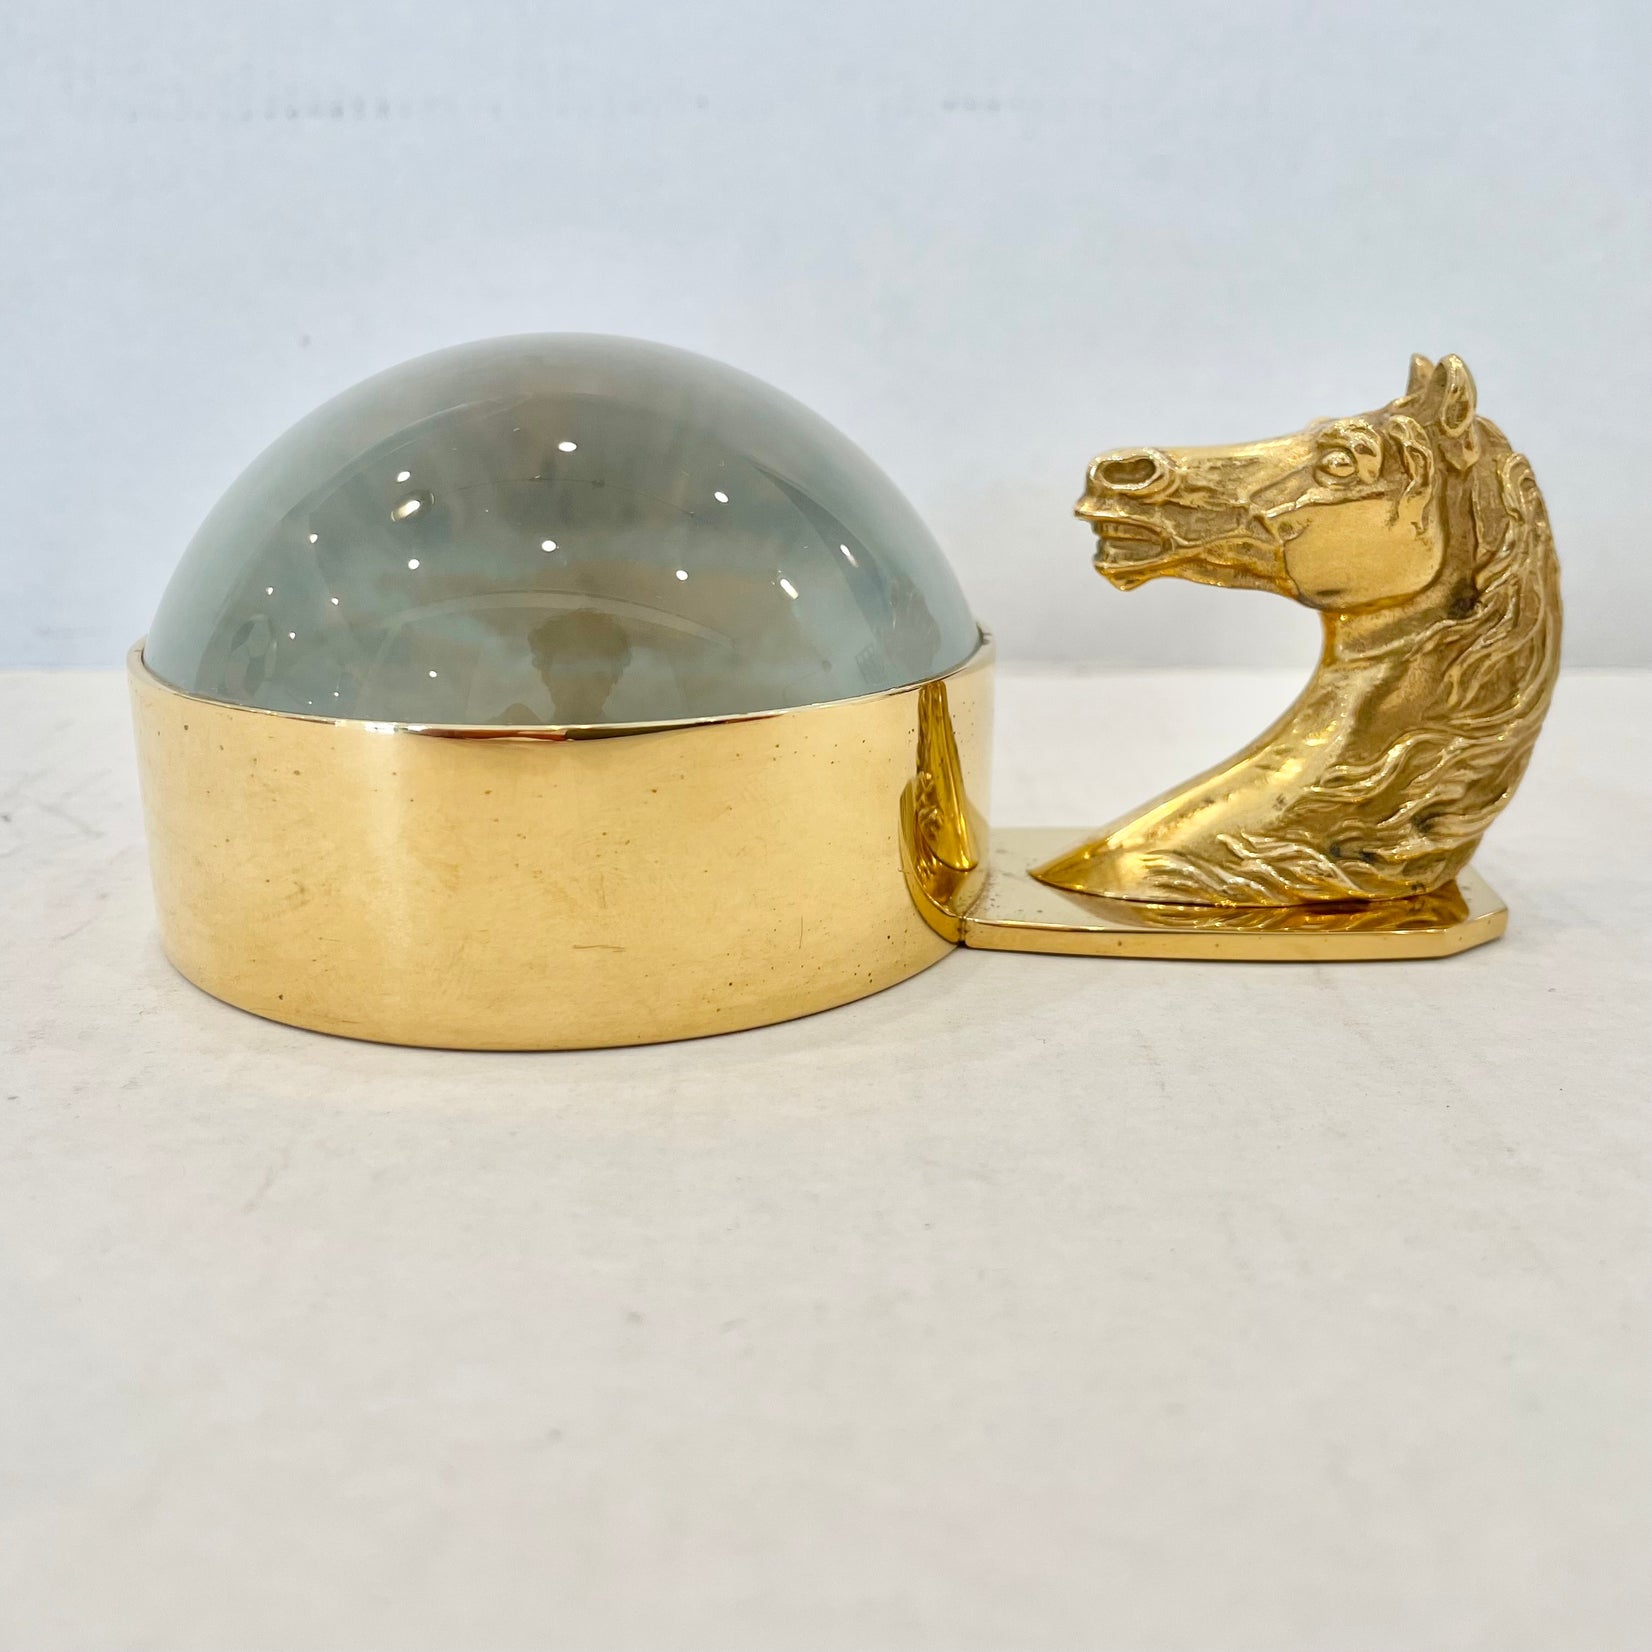 Hermes Equestrian Magnifying Glass, 1960s France